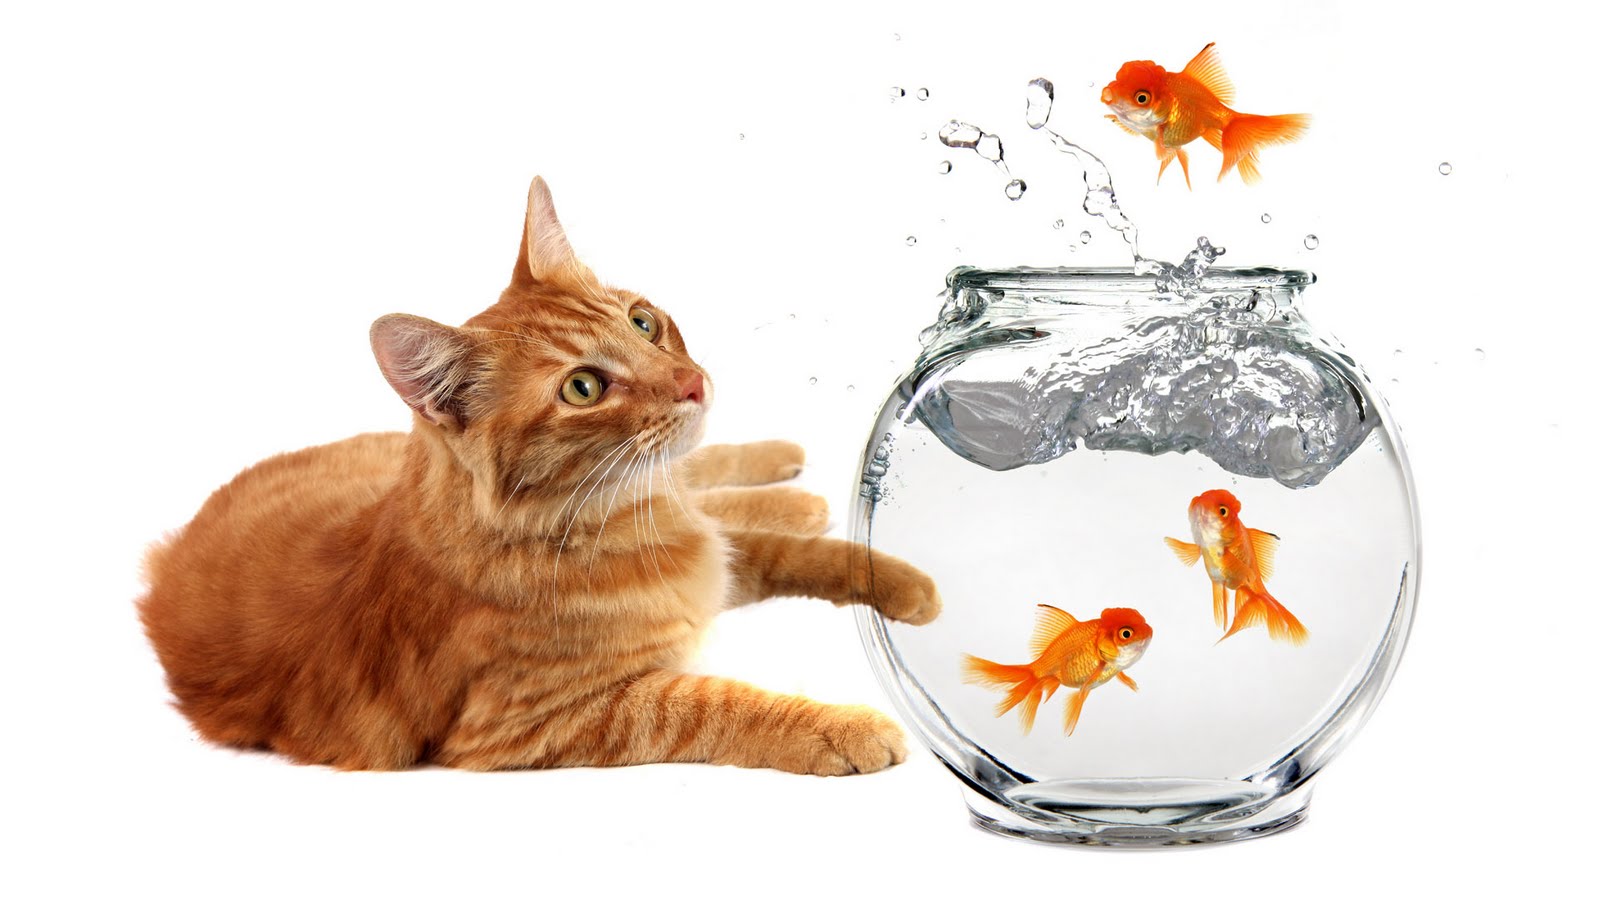 cat pictures for wallpaper,goldfish,cat,felidae,small to medium sized cats,fish